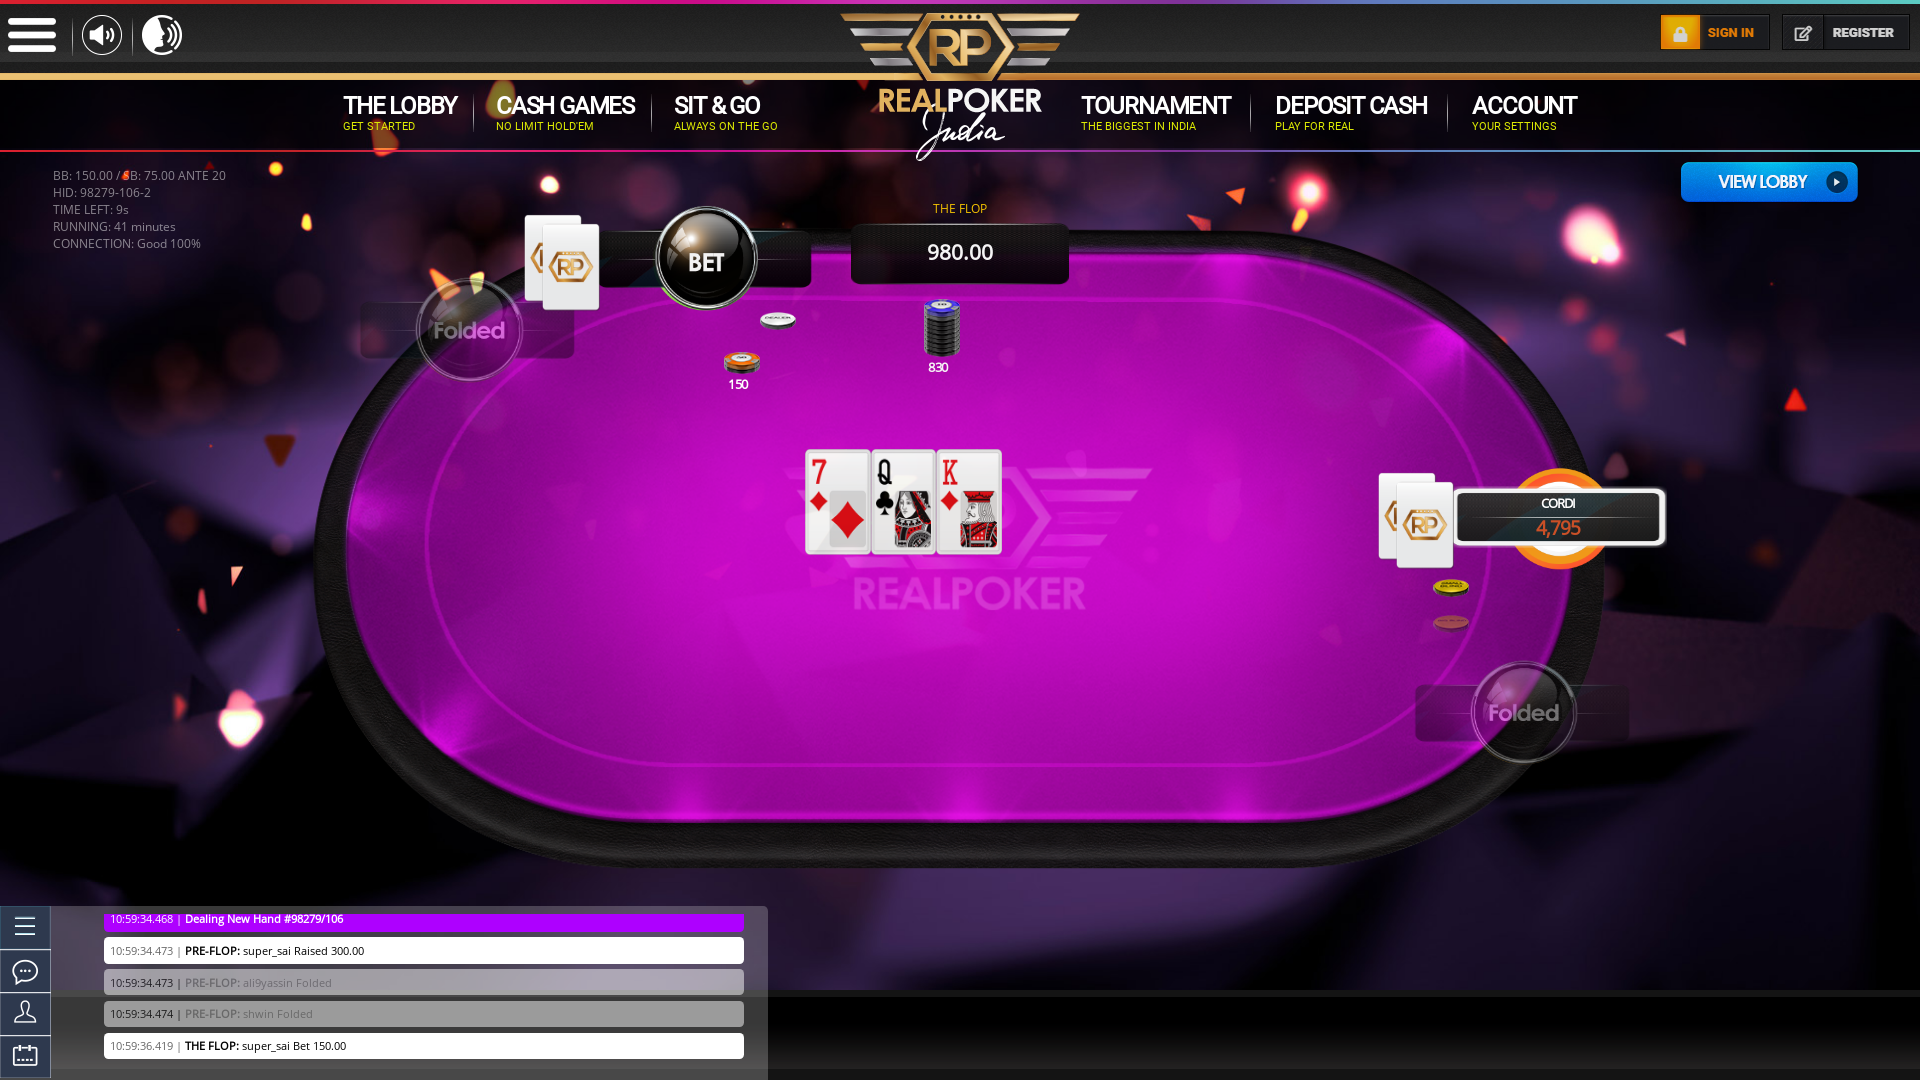 Real poker 10 player table in the 4 match